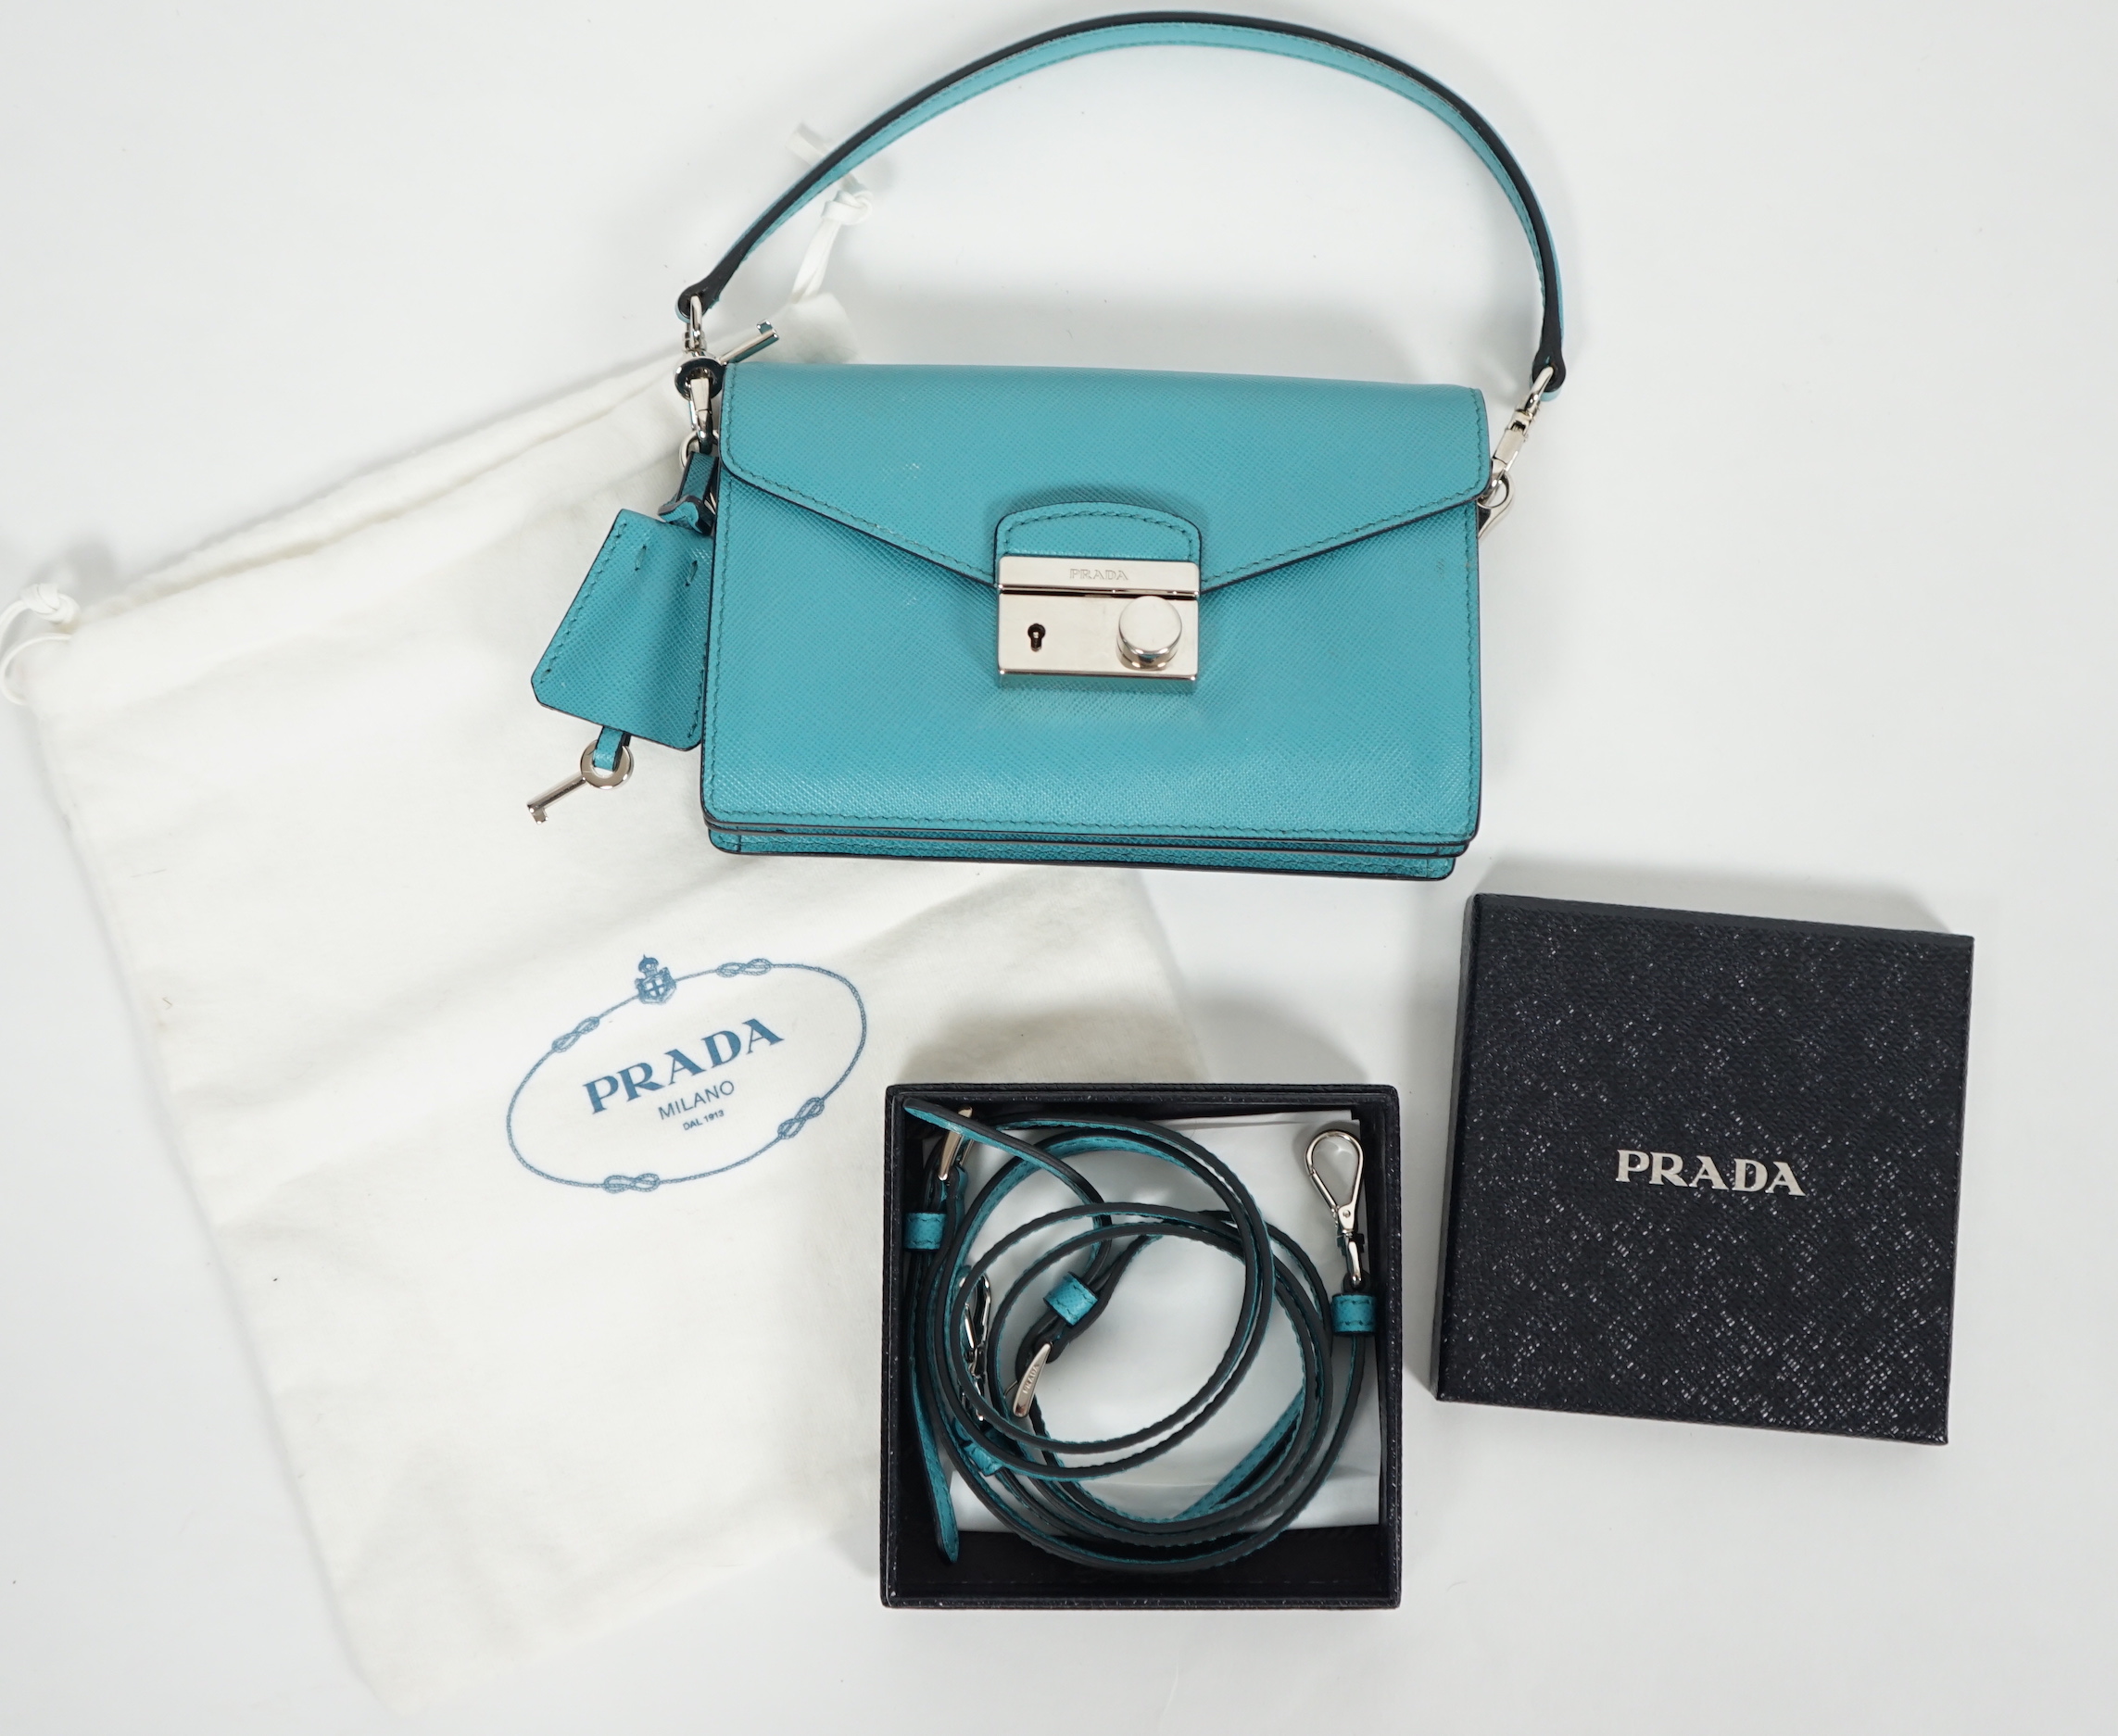 A Prada Saffiano Lux Mini Sound bag in Turchese, width 16cm, height 10cm, depth 4cm, overall height to handle 20cm